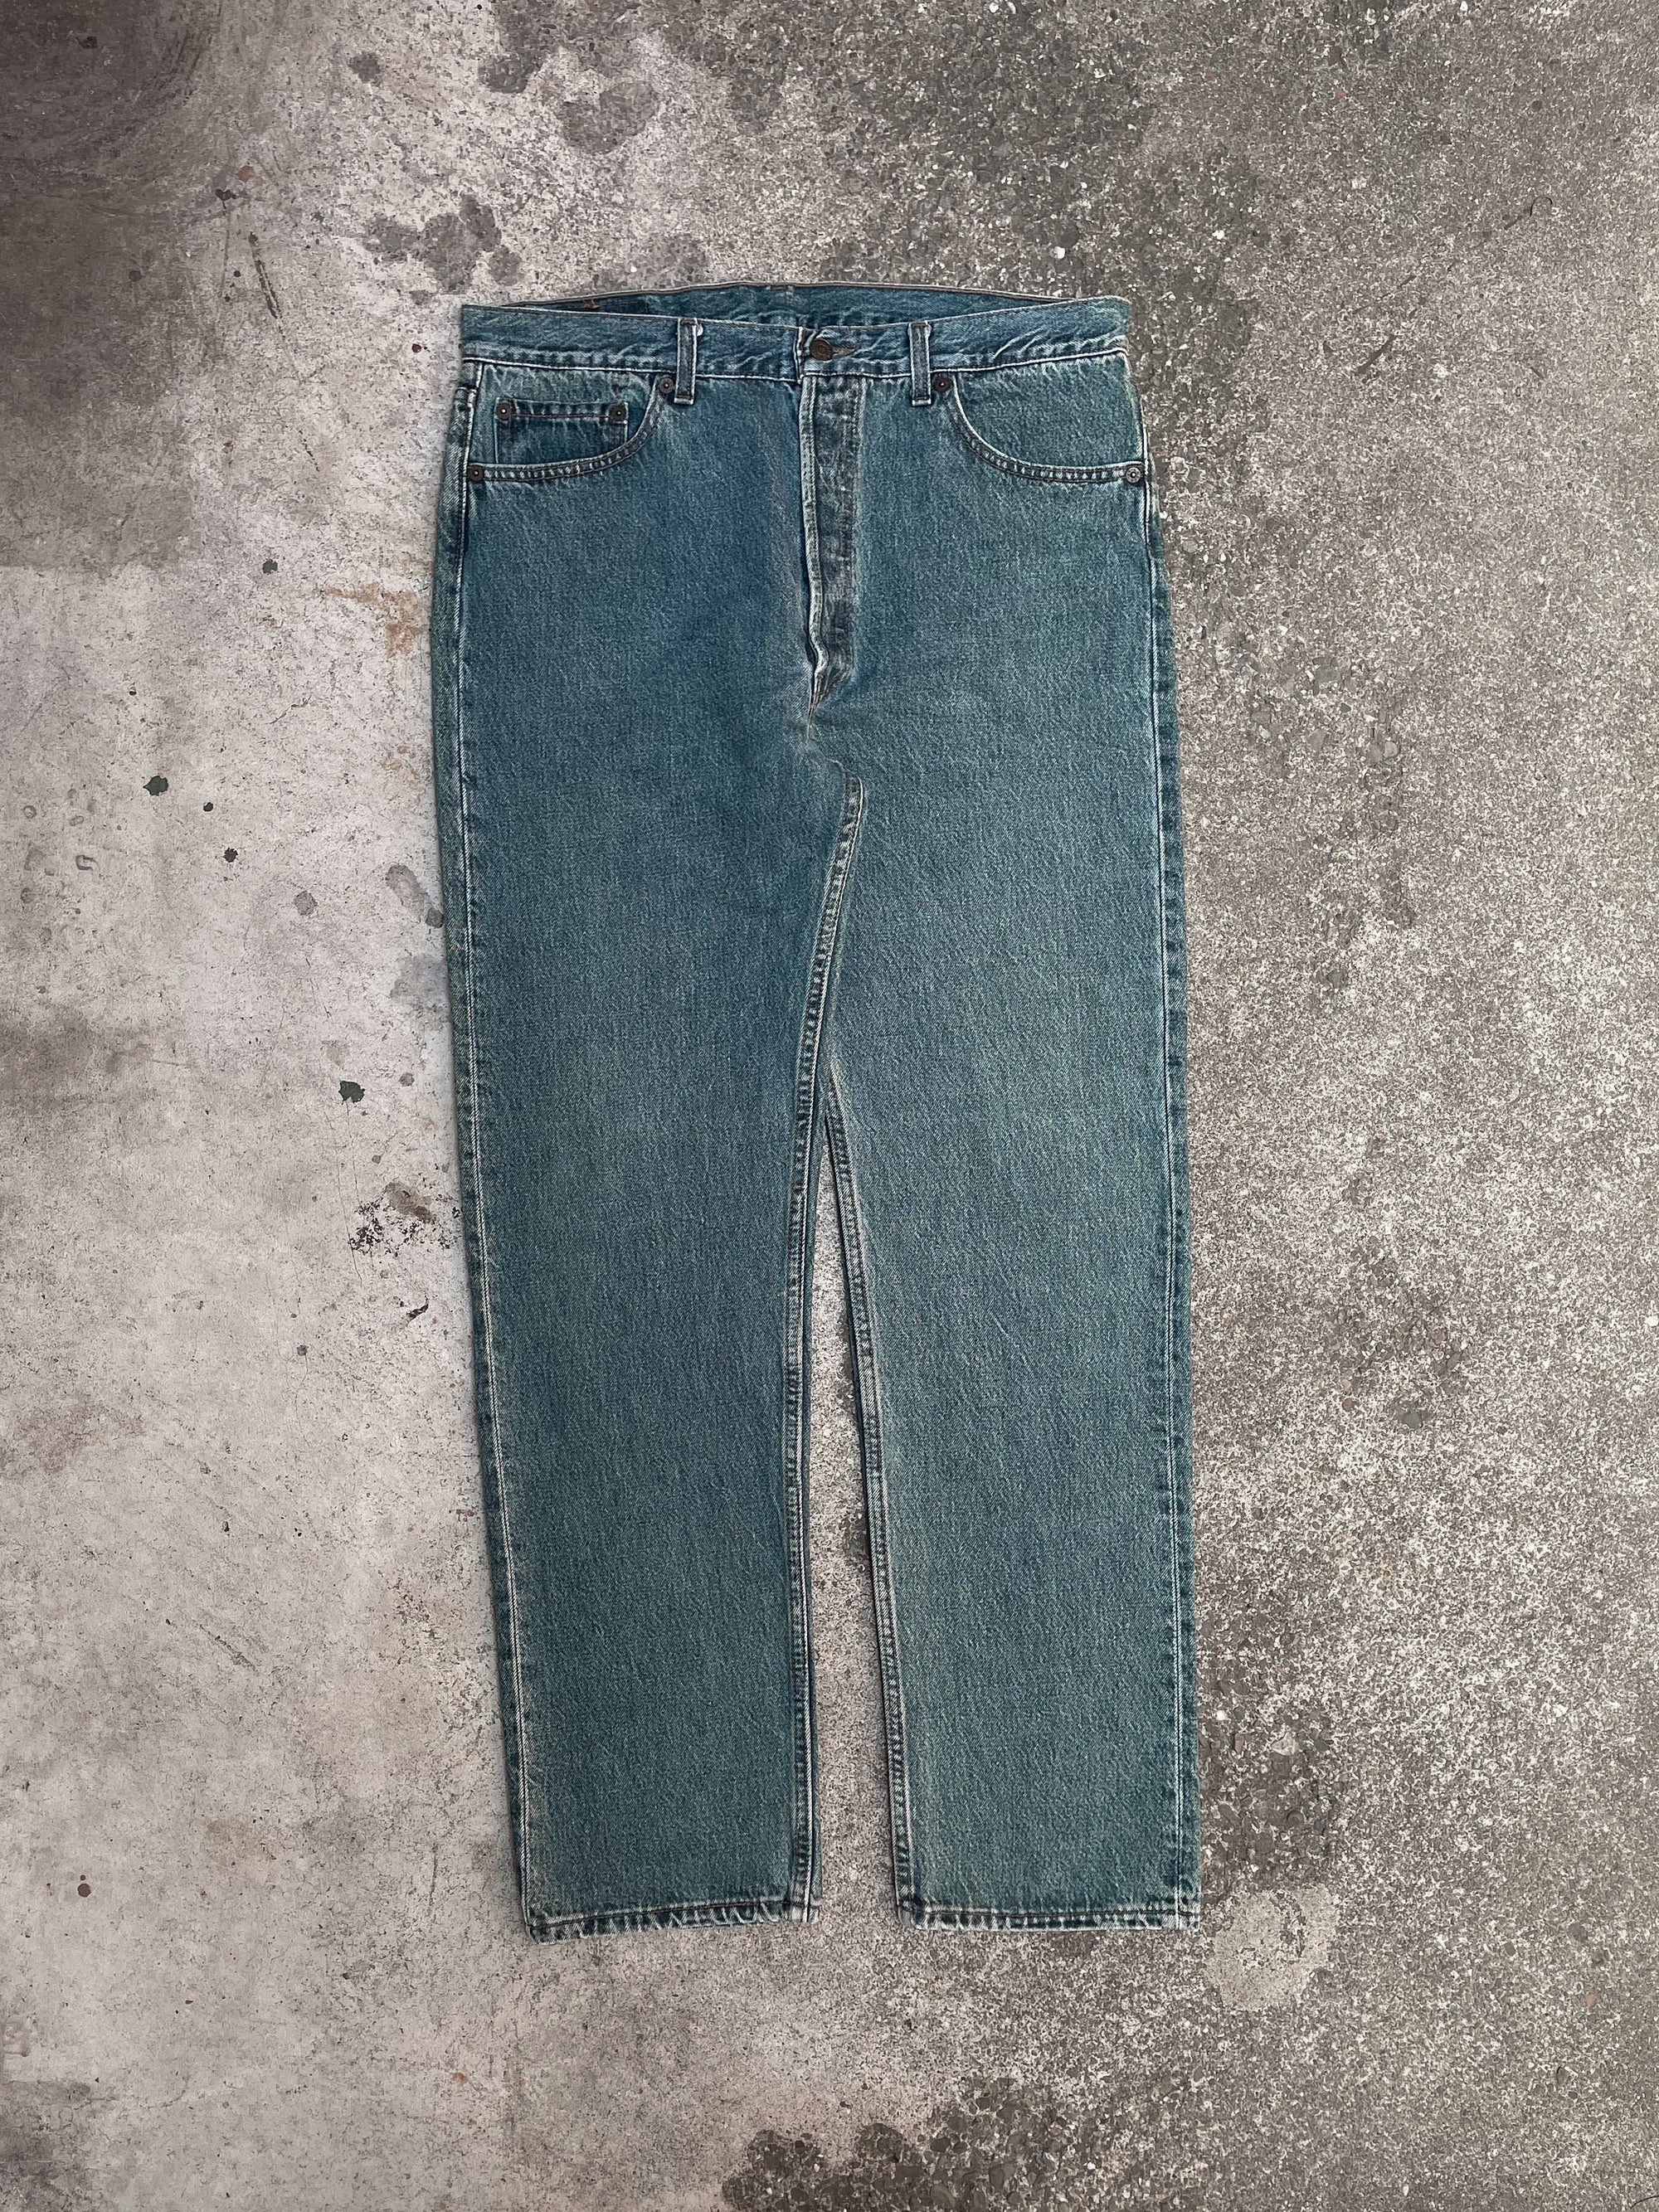 1990s Levi’s Faded Blue Green 501 (35X31)